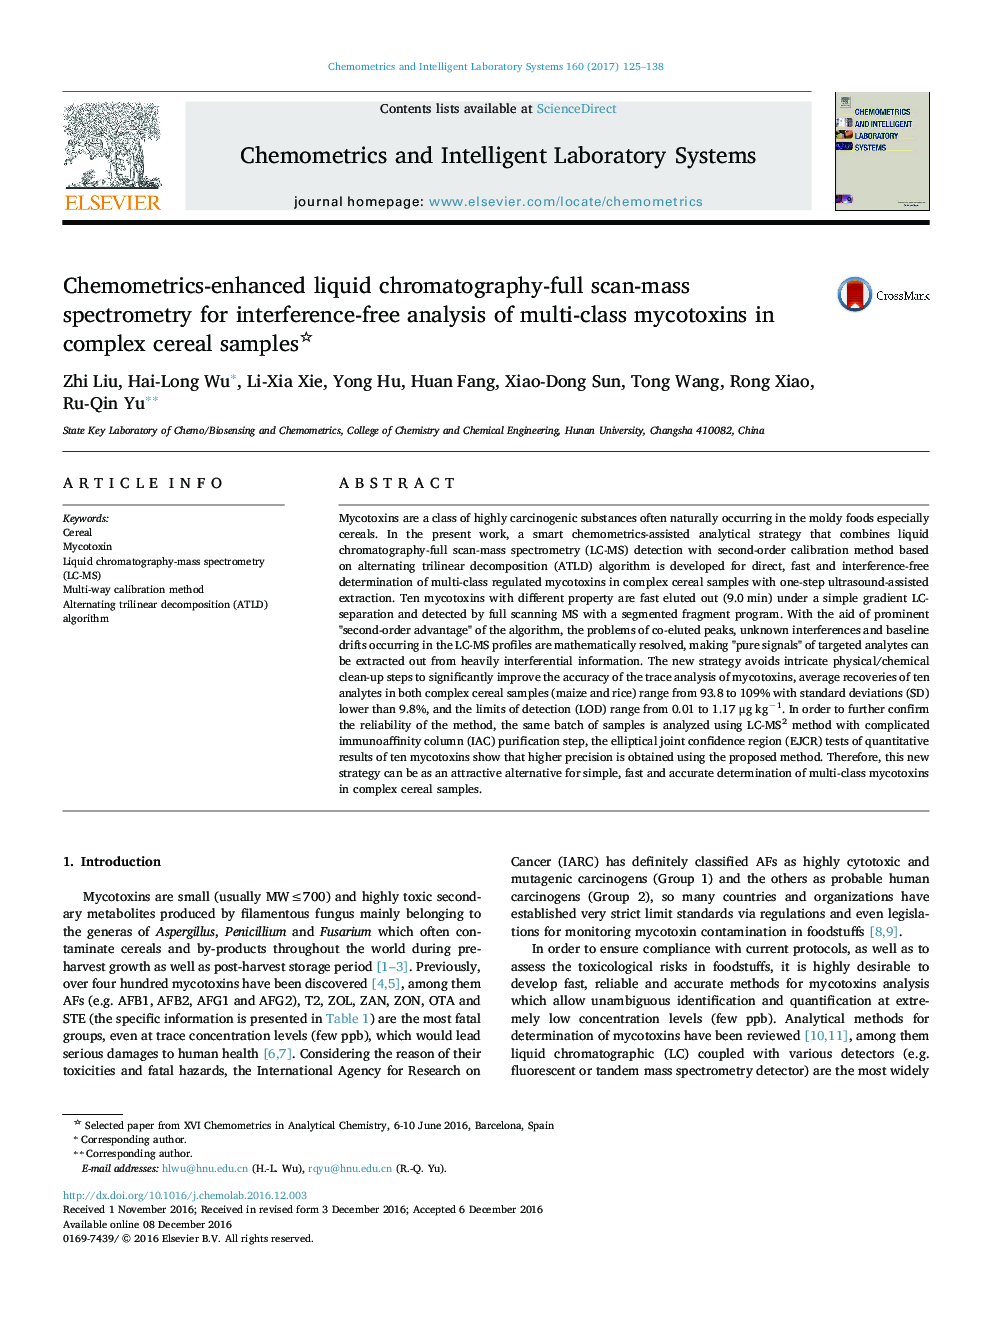 Chemometrics-enhanced liquid chromatography-full scan-mass spectrometry for interference-free analysis of multi-class mycotoxins in complex cereal samples